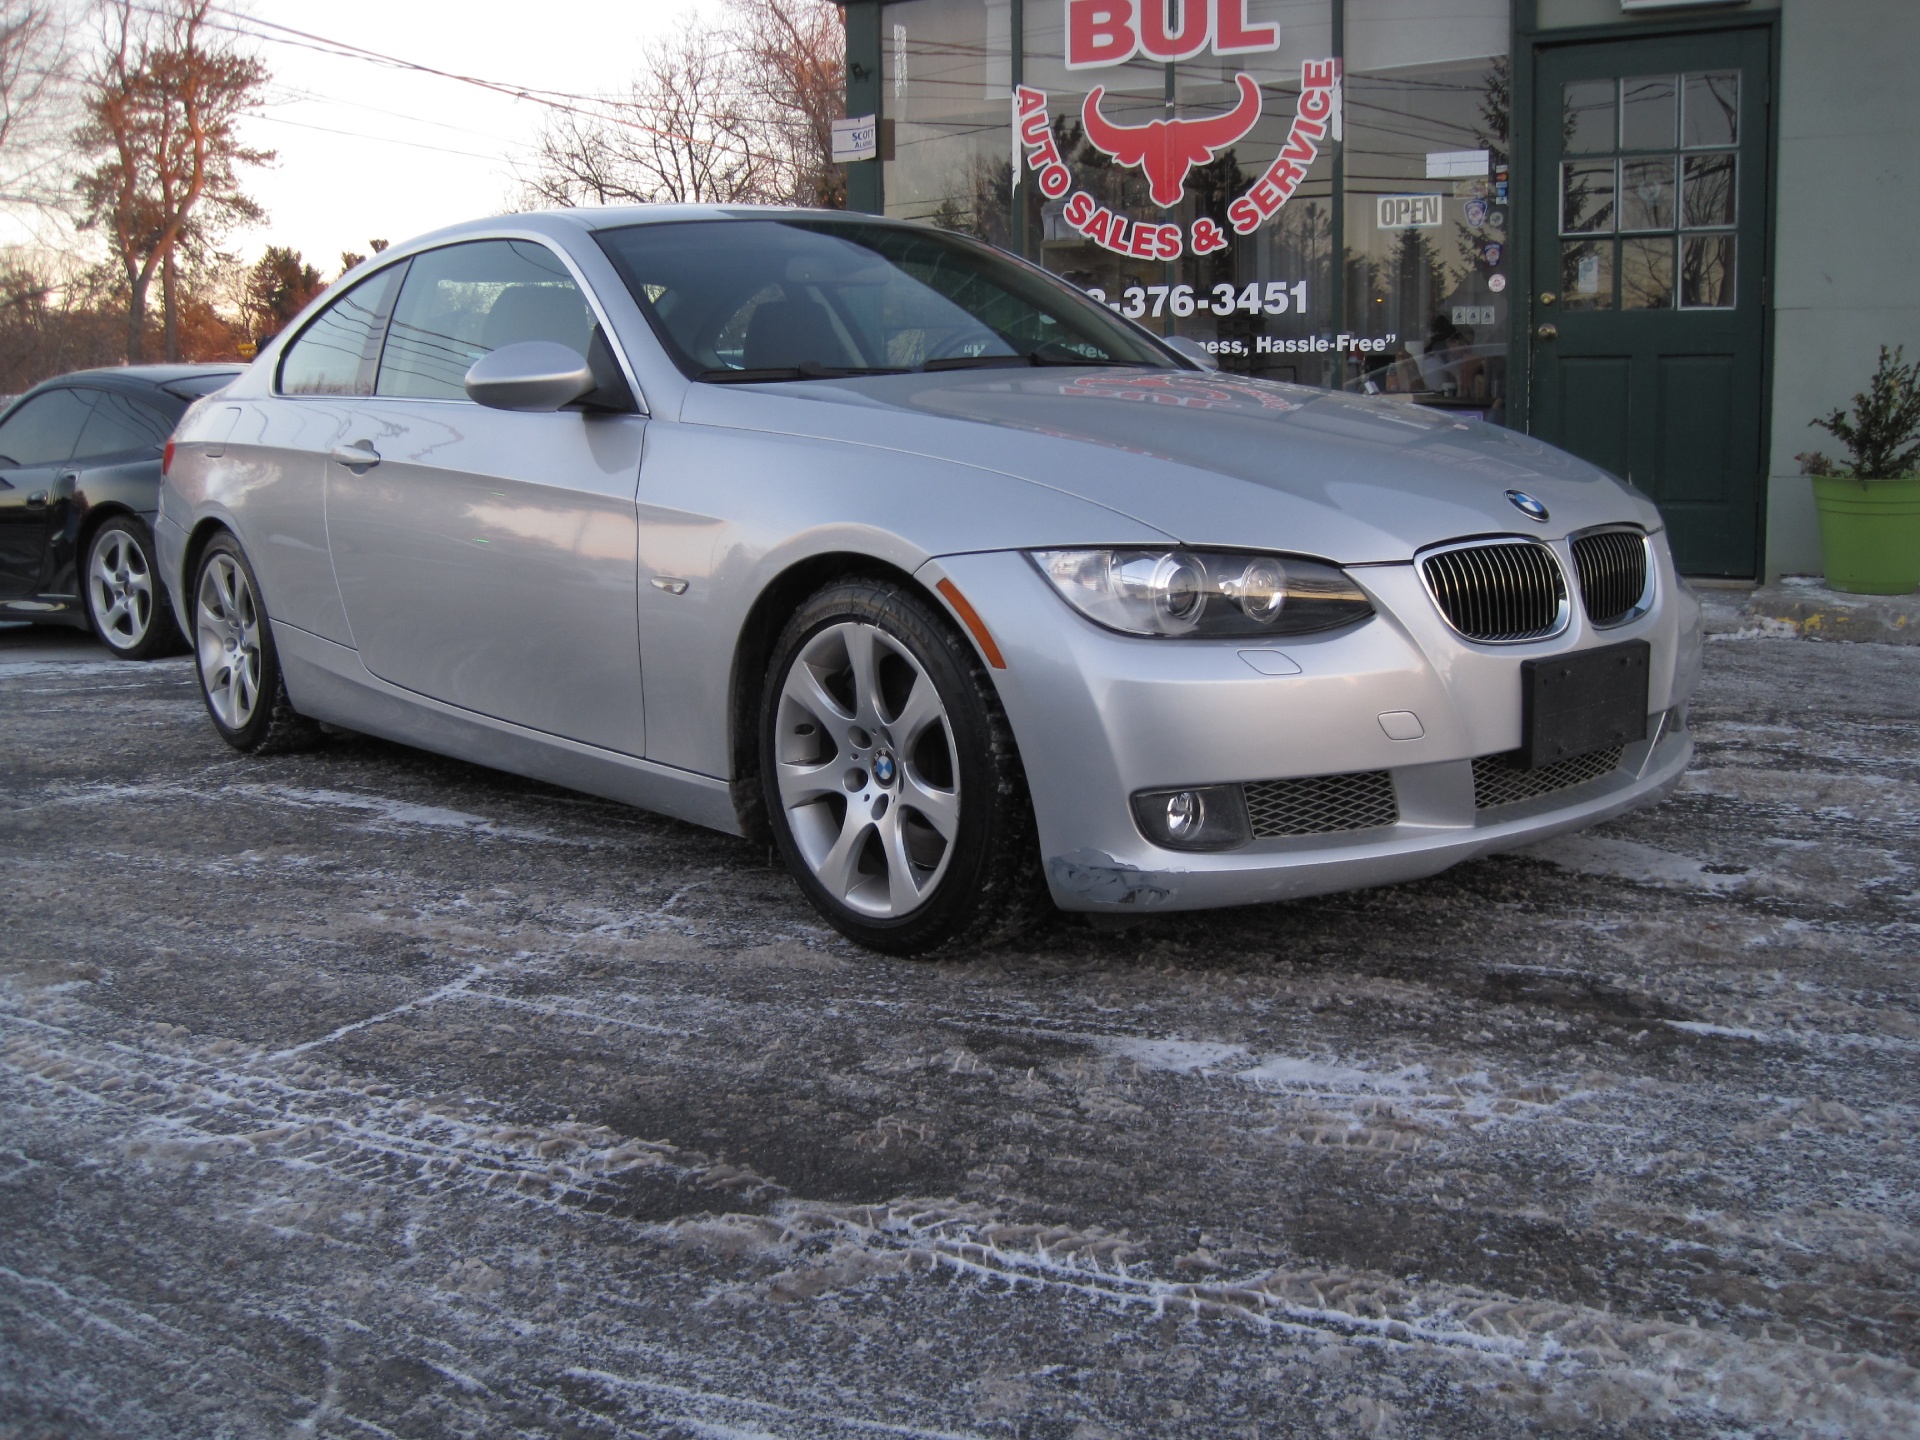 2007 Bmw 3 Series 335i Coupe Rare 6 Speed Manual Premium Cold Weather Pkgs Stock 15011 For Sale Near Albany Ny Ny Bmw Dealer For Sale In Albany Ny 15011 Bul Auto Sales